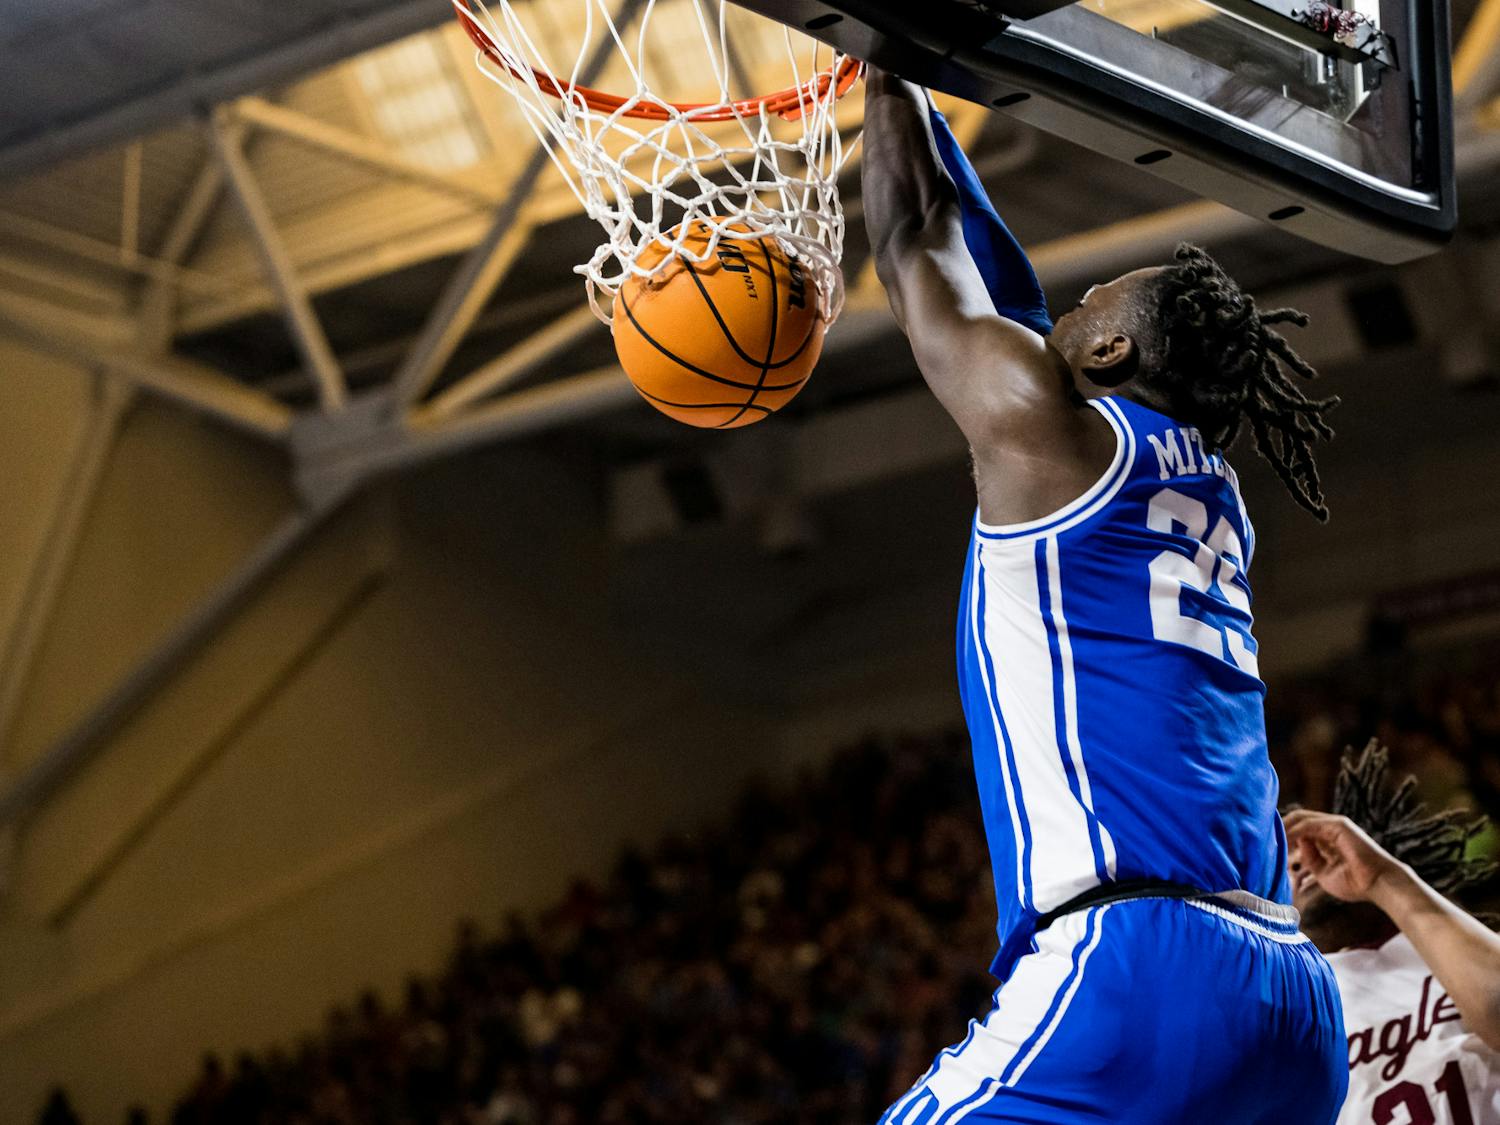 Mark Mitchell slams home the dunk against Boston College.